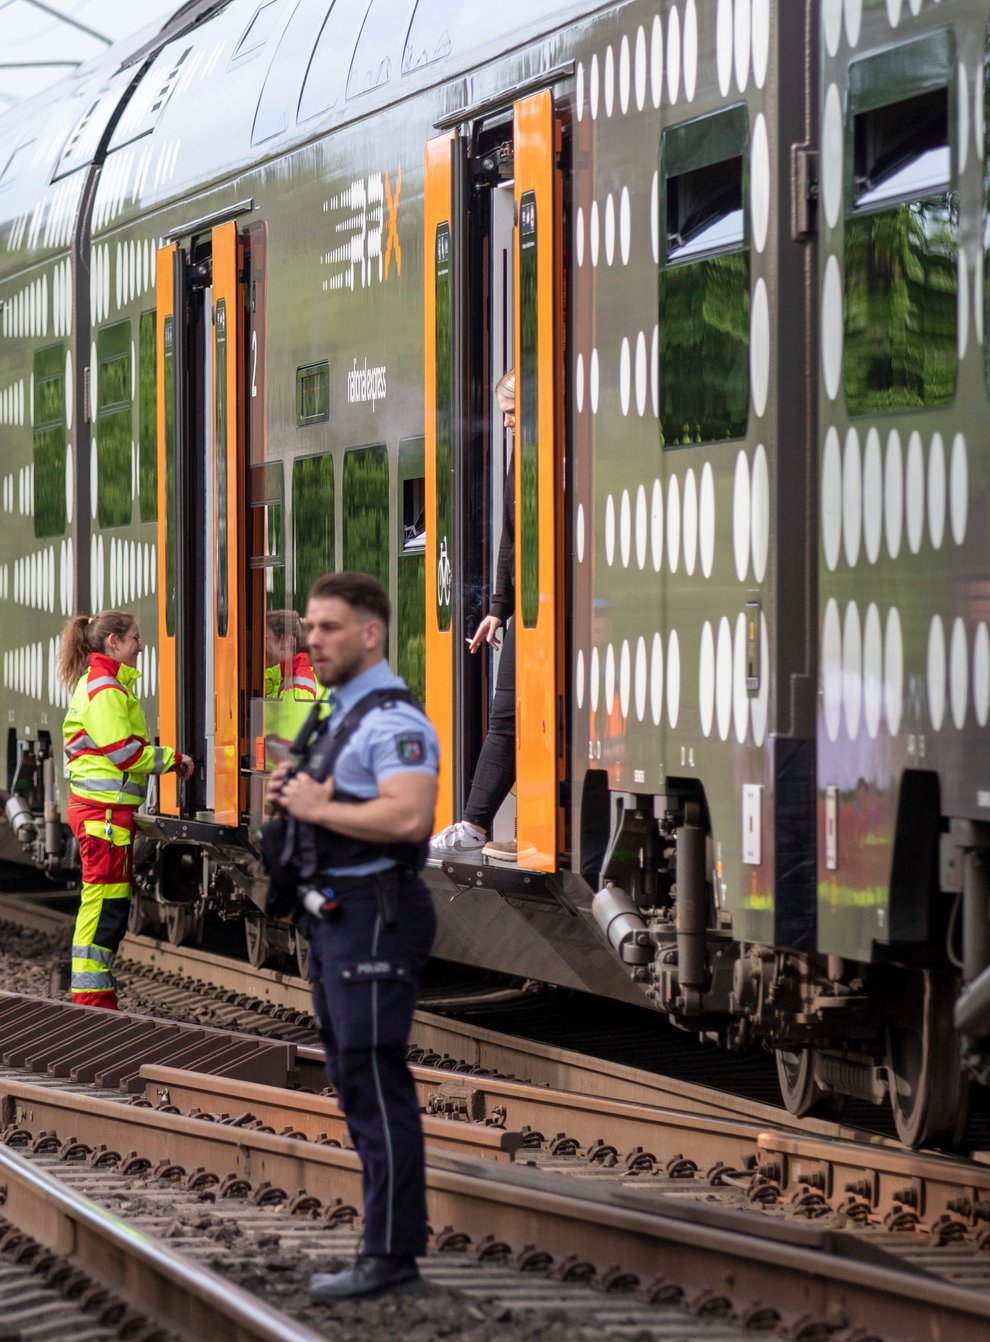 Police officers standing in front of a regional train in Herzogenrath, Germany (Ralf Roeger/dpa/AP)